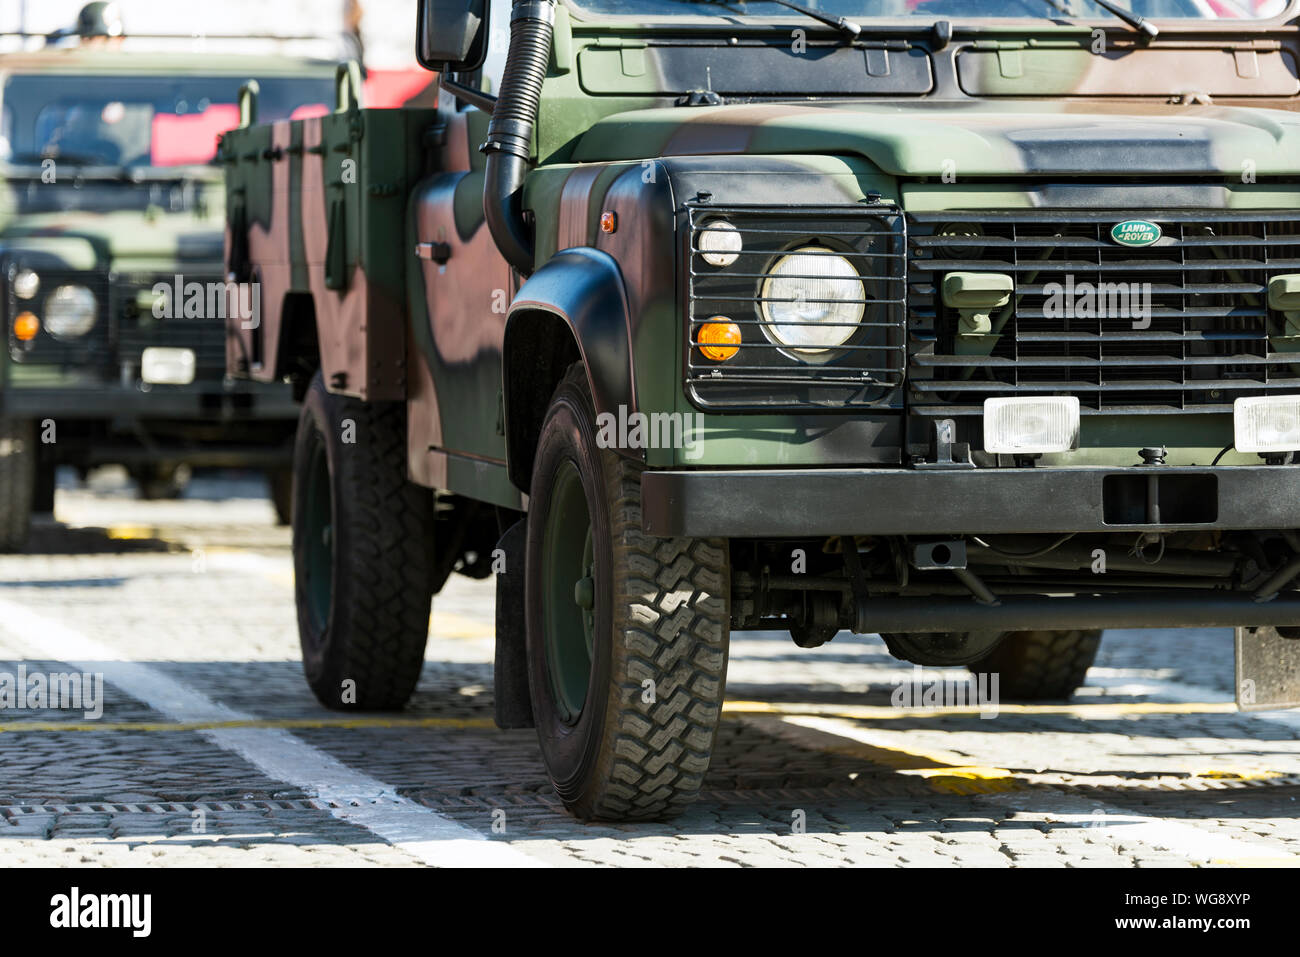 Izmir, Turkey - October 29, 2019: Front view of a Land Rover brand military Suv on a cobble stone road. Stock Photo